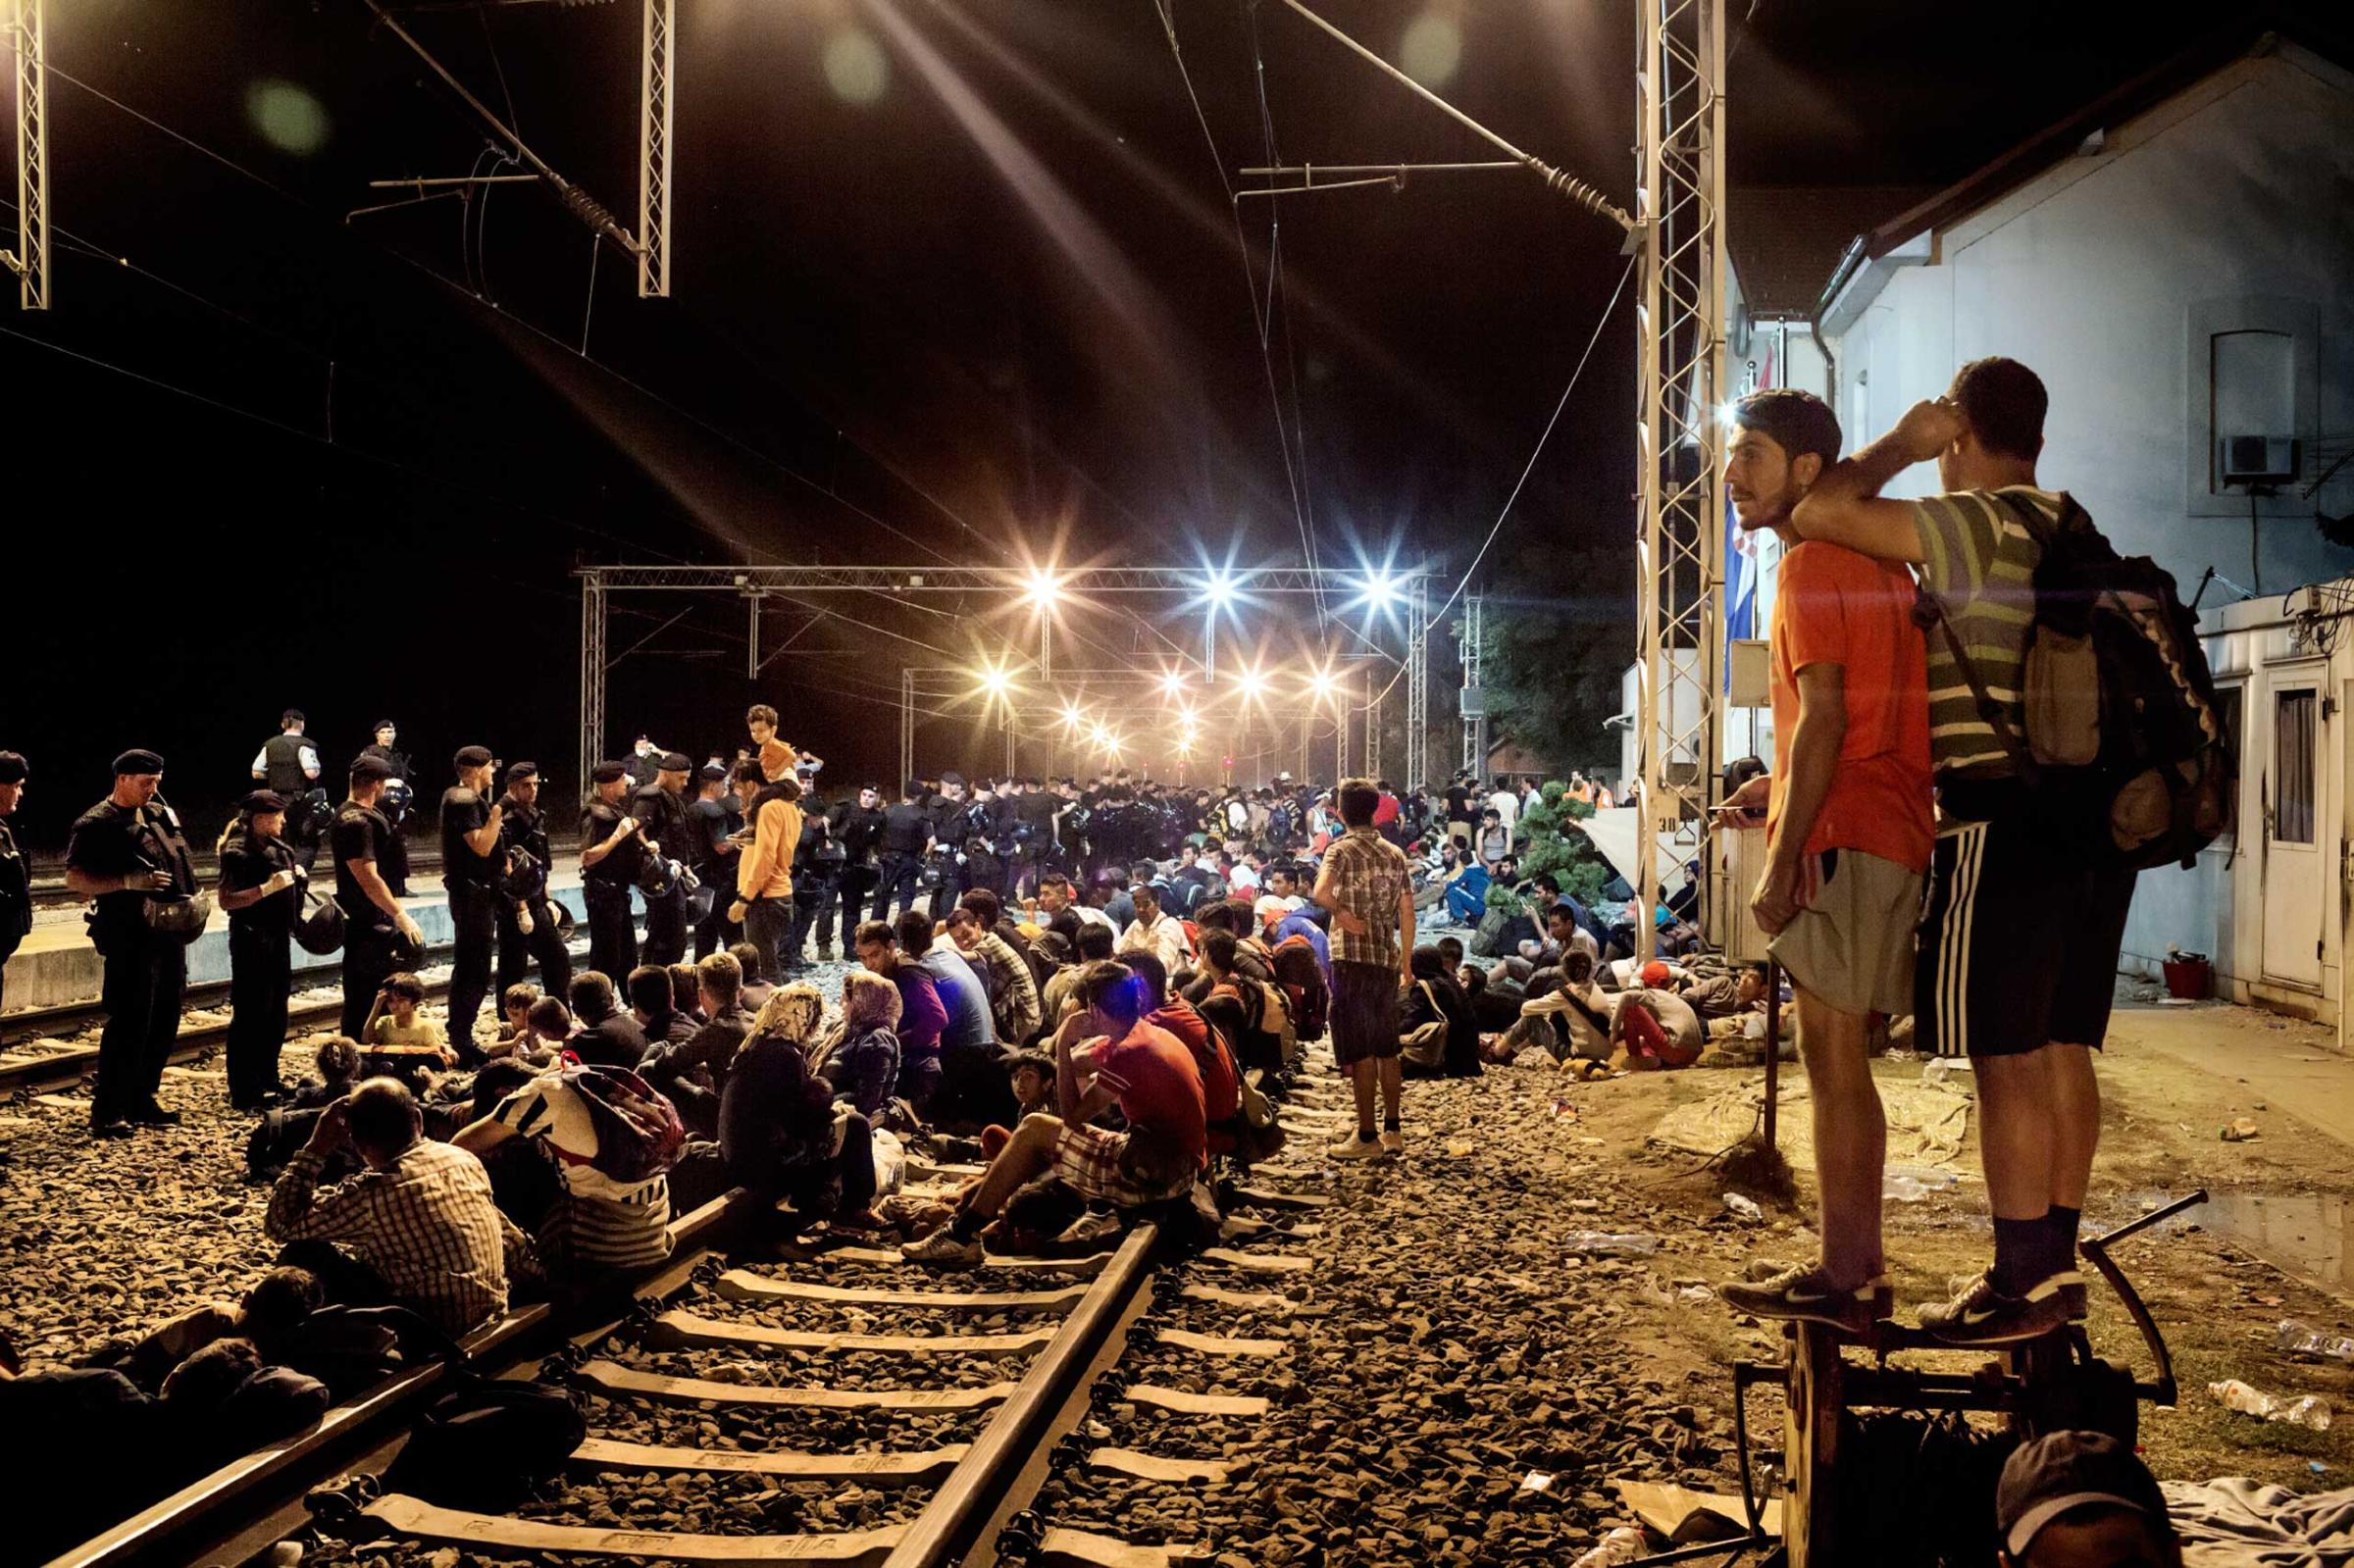 Refugees, asylum seekers and migrants at the train station at the Croatian town of Tovarnik, near the border with Serbia, Sept. 18, 2015. After Hungary closed its border with Serbia on Sept. 15, 2015, the flow of refugees attempting to reach further north in Europe shifted to Croatia.